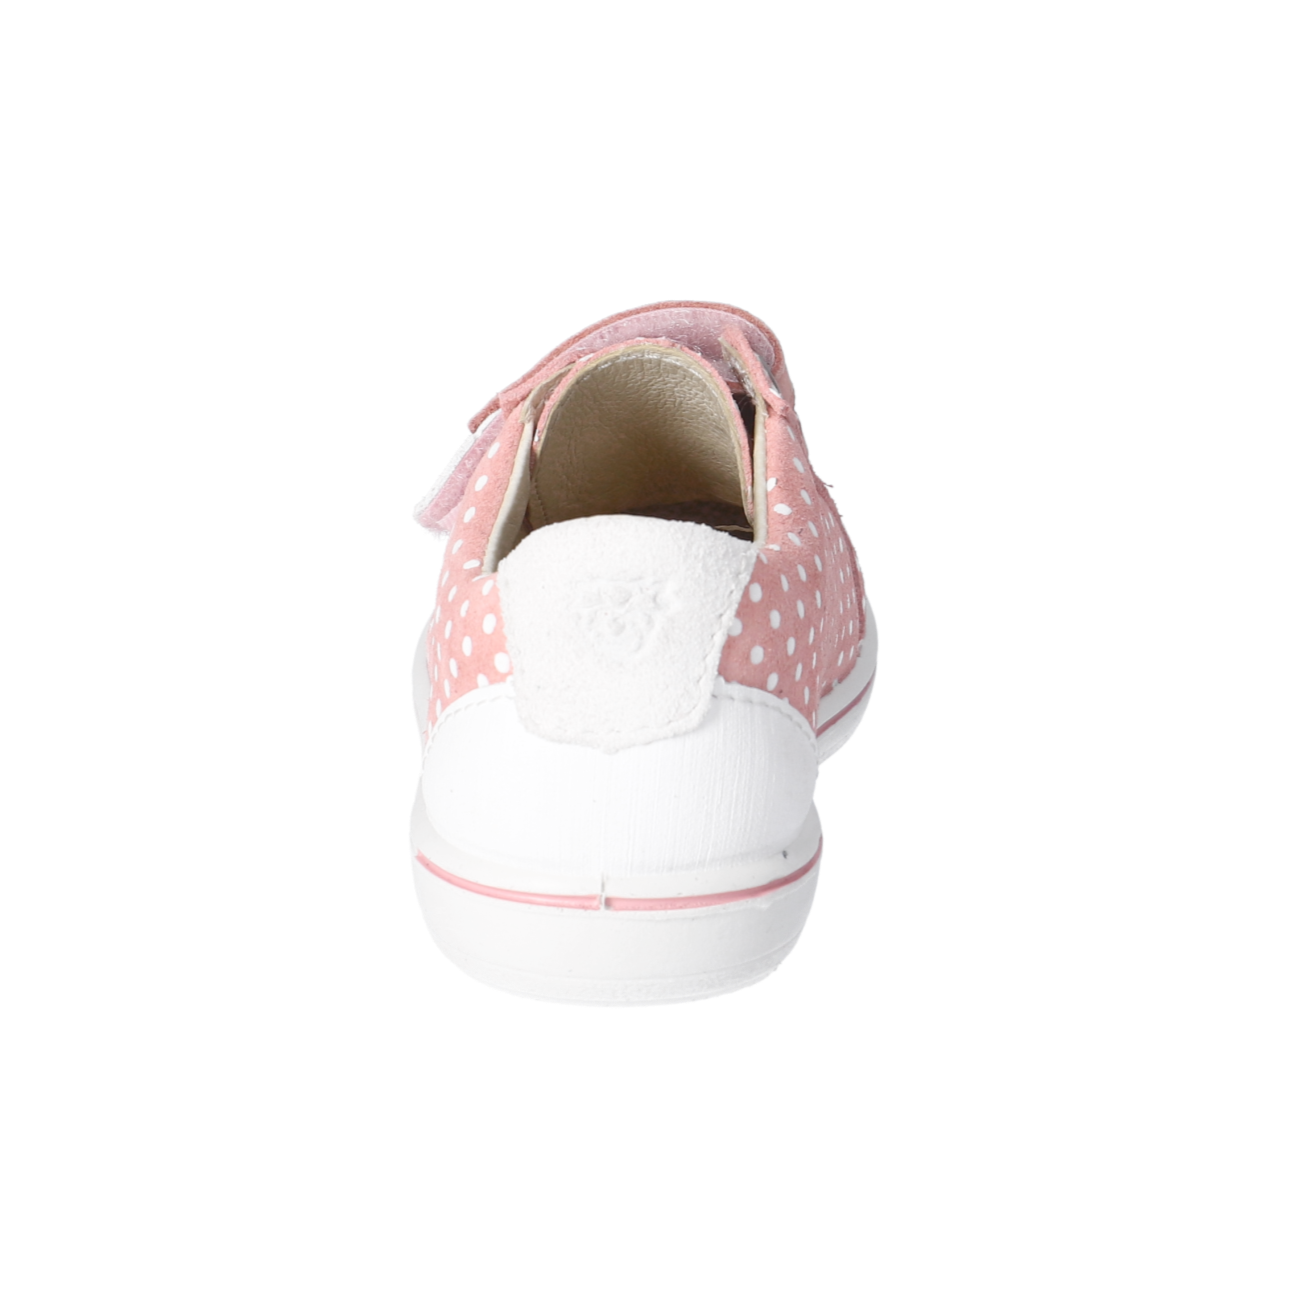 Niccy Leather Sneaker in Strawberry Pink and White Ditsy Dots